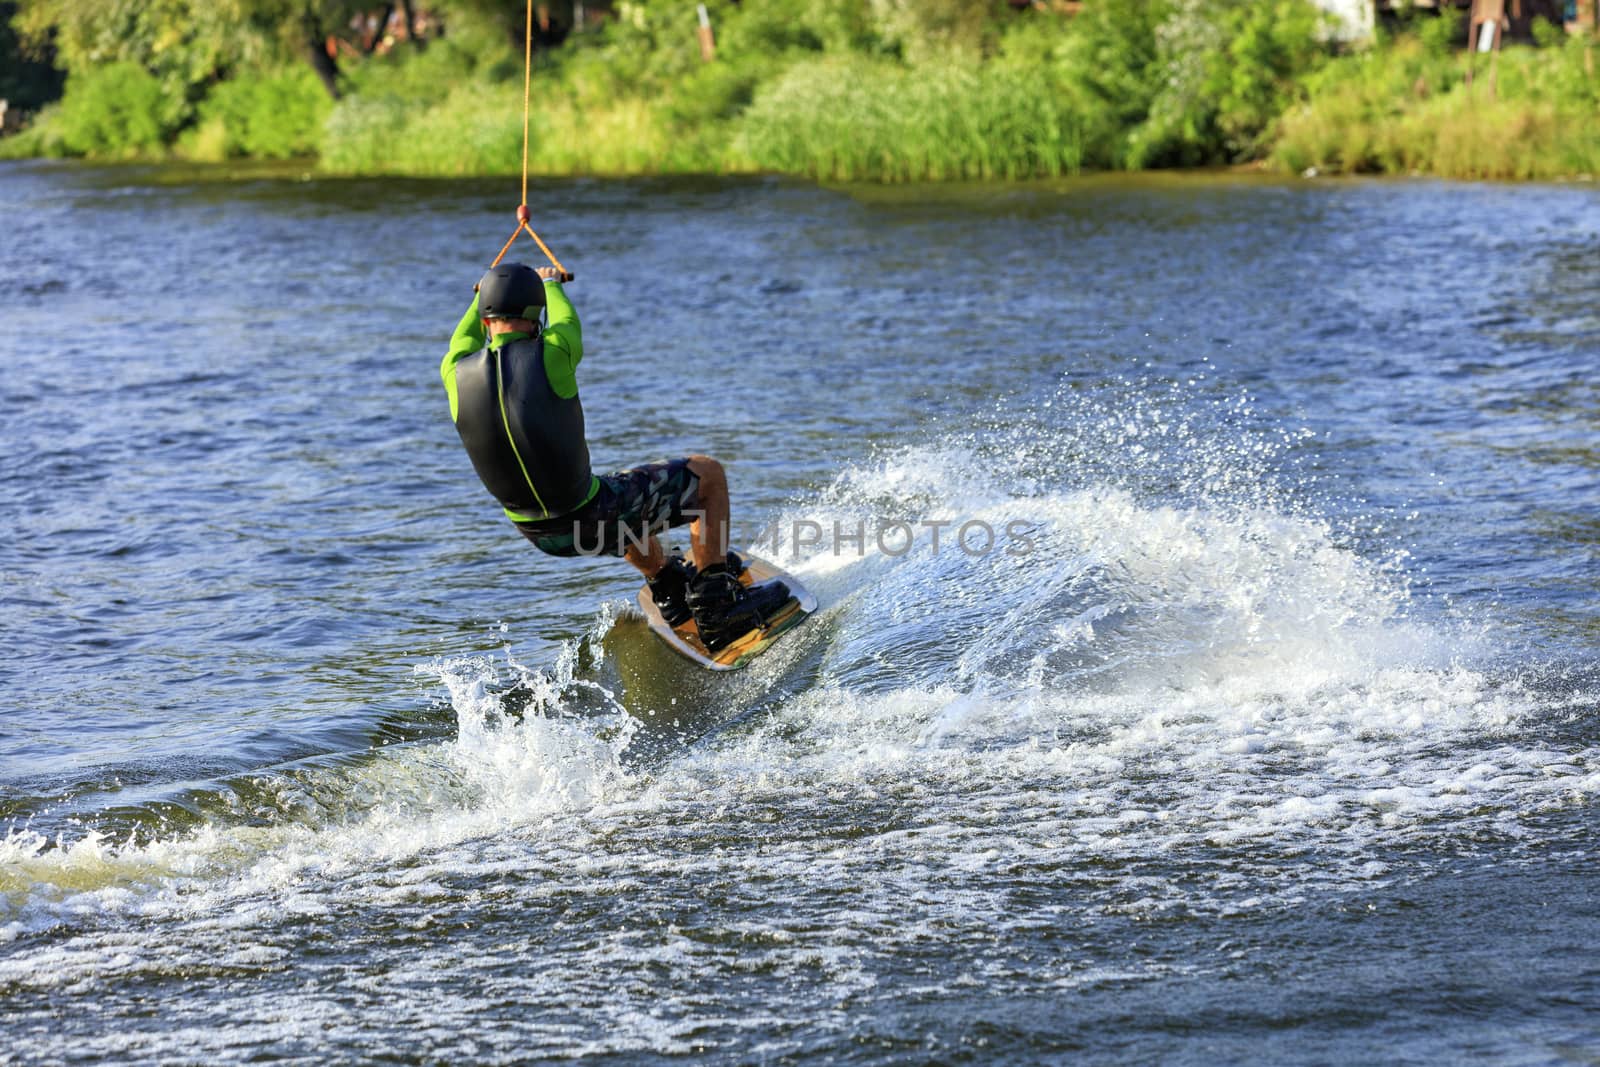 A wakeboarder rushes through the water along the riverbank, holding the cable with both hands and leaving a waterway behind him.